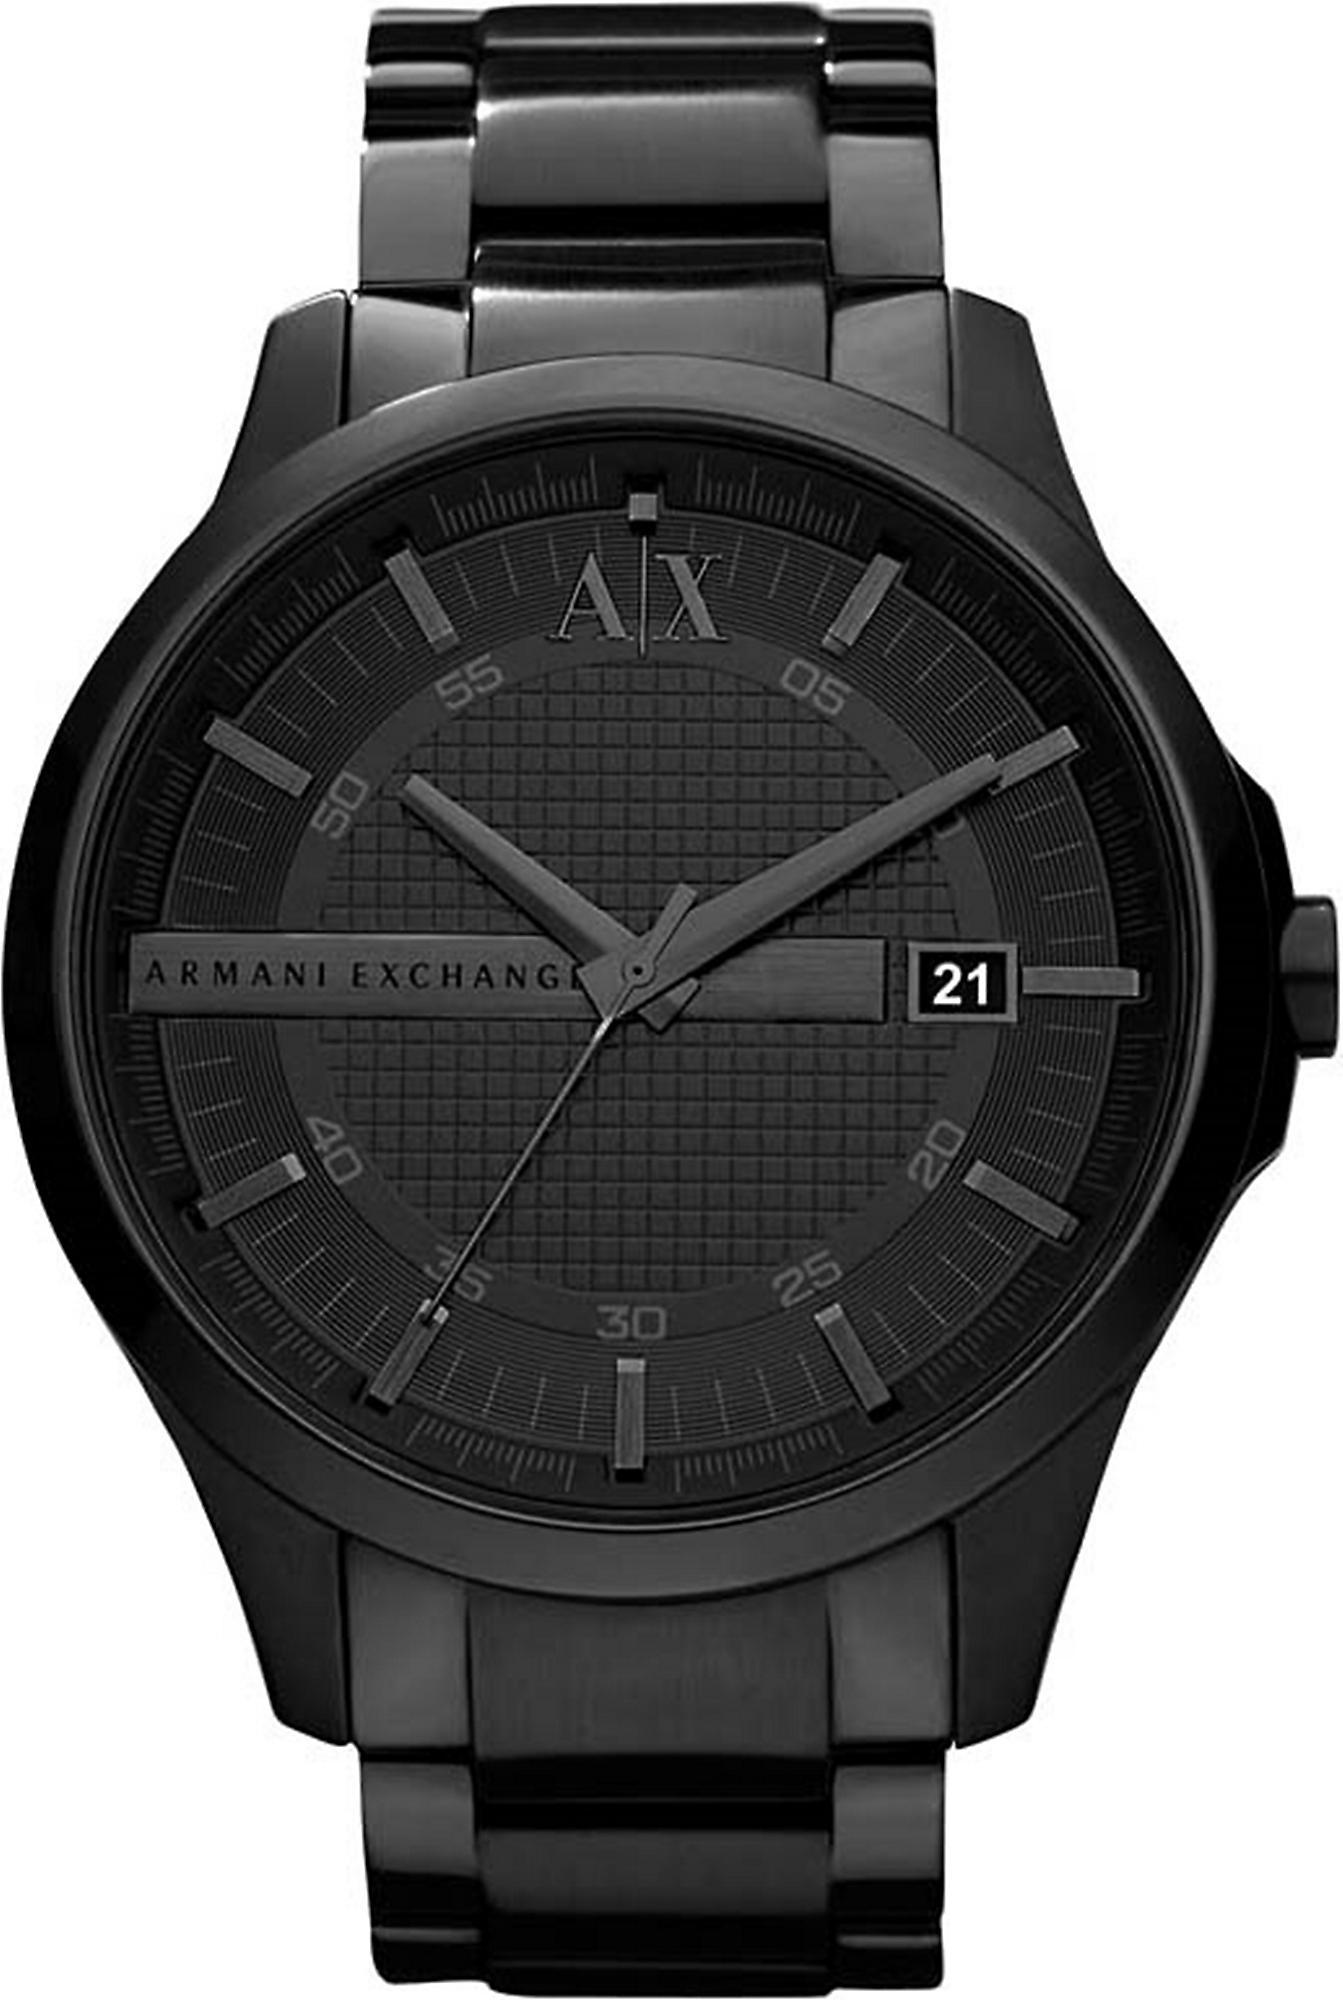 Armani Exchange Ax2104 Stainless Steel And Leather Watch in Black for Armani Exchange Men's Stainless Steel Watch